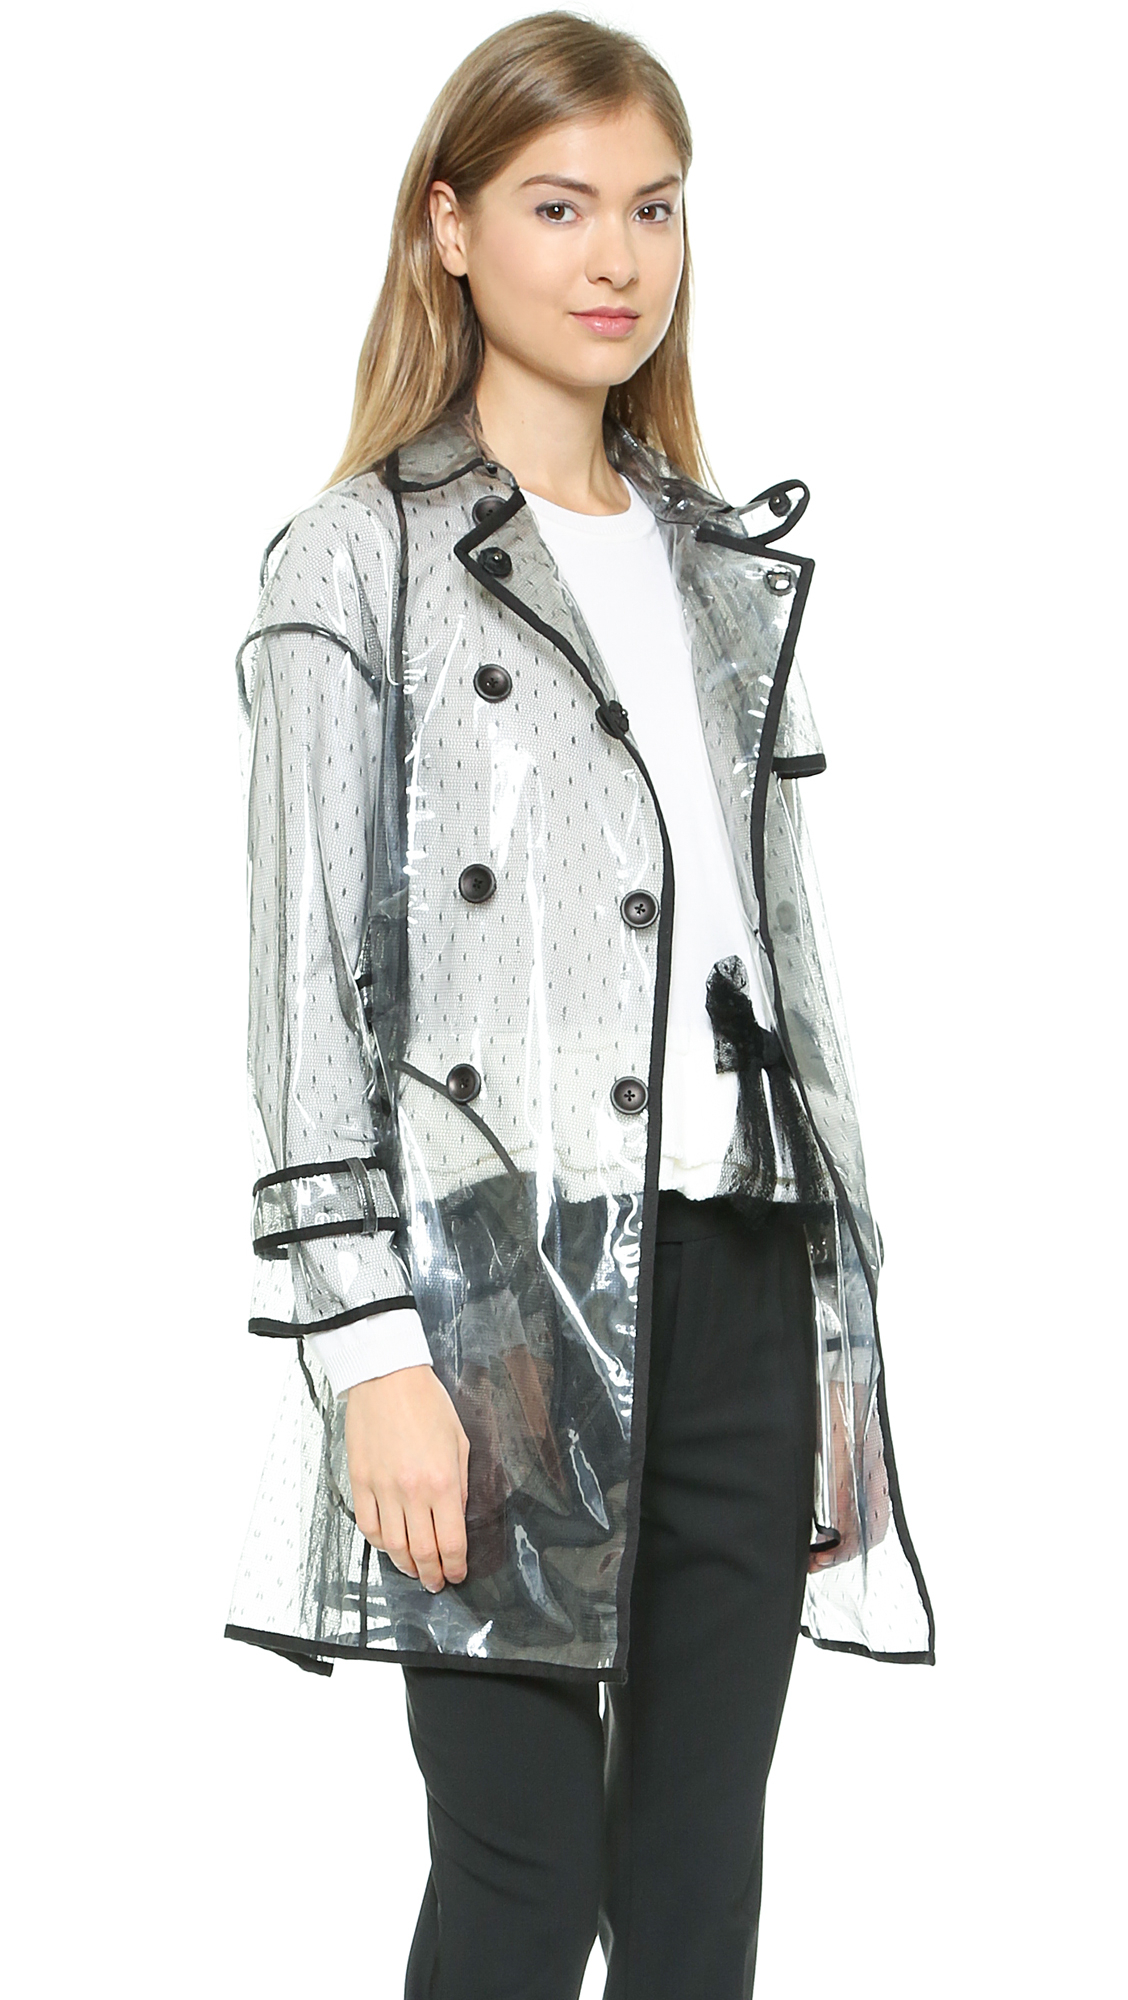 Clear Plastic Trench Coat Tradingbasis